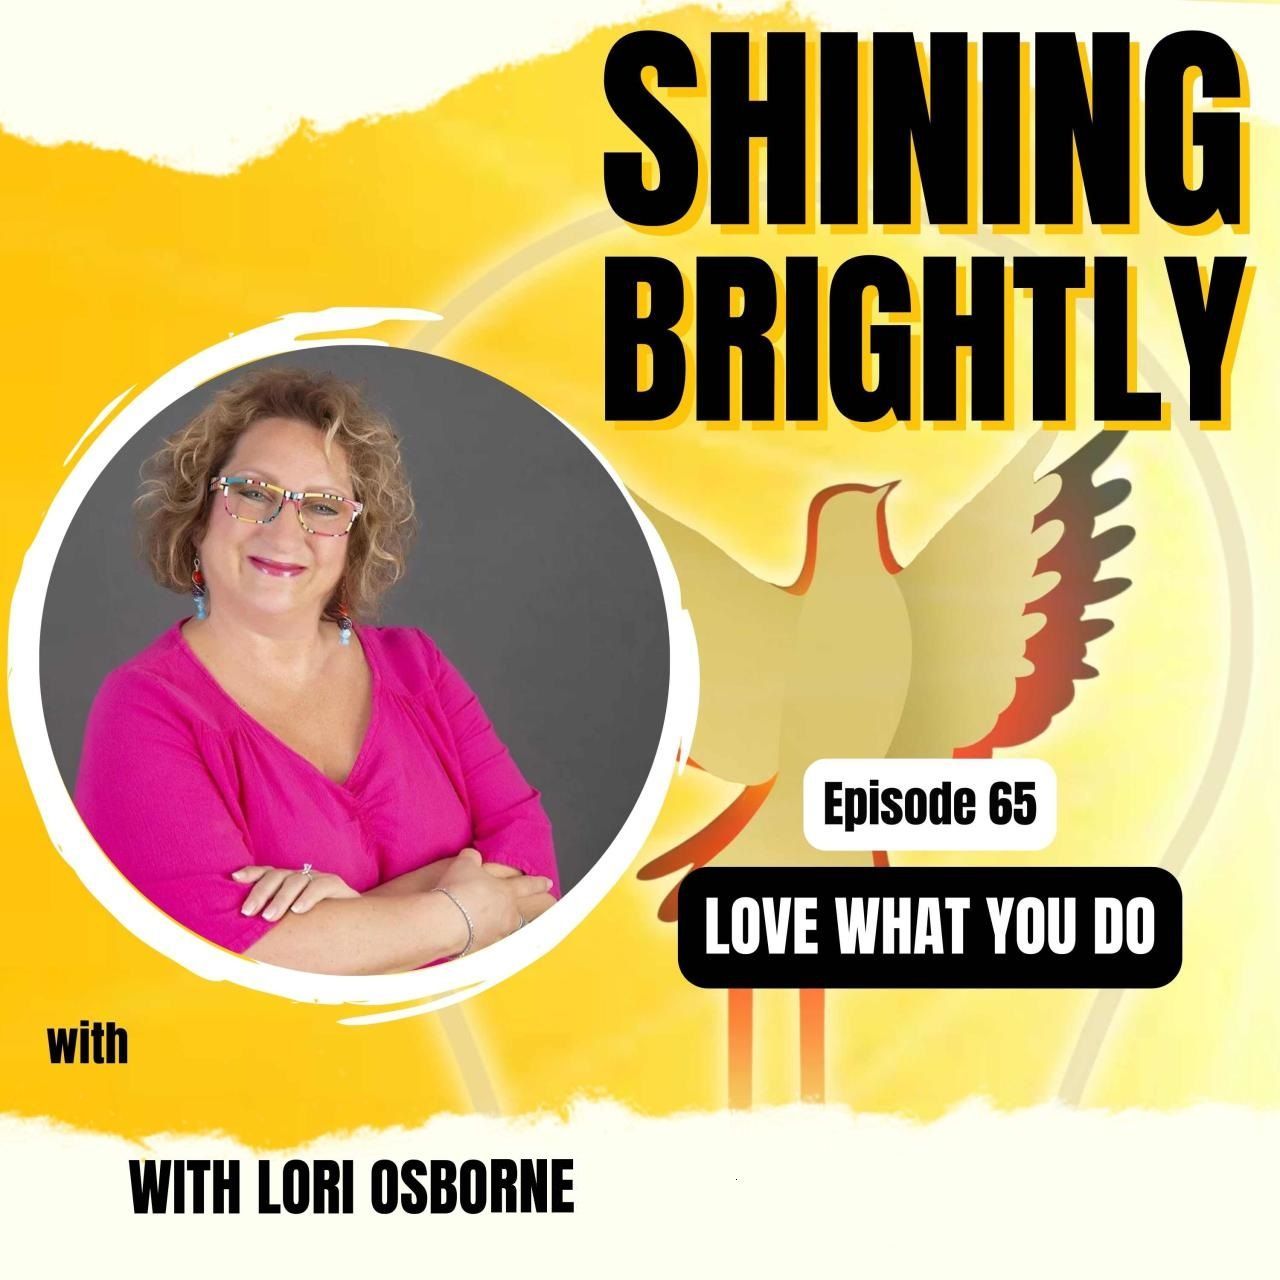 Interview with Shining Brightly 